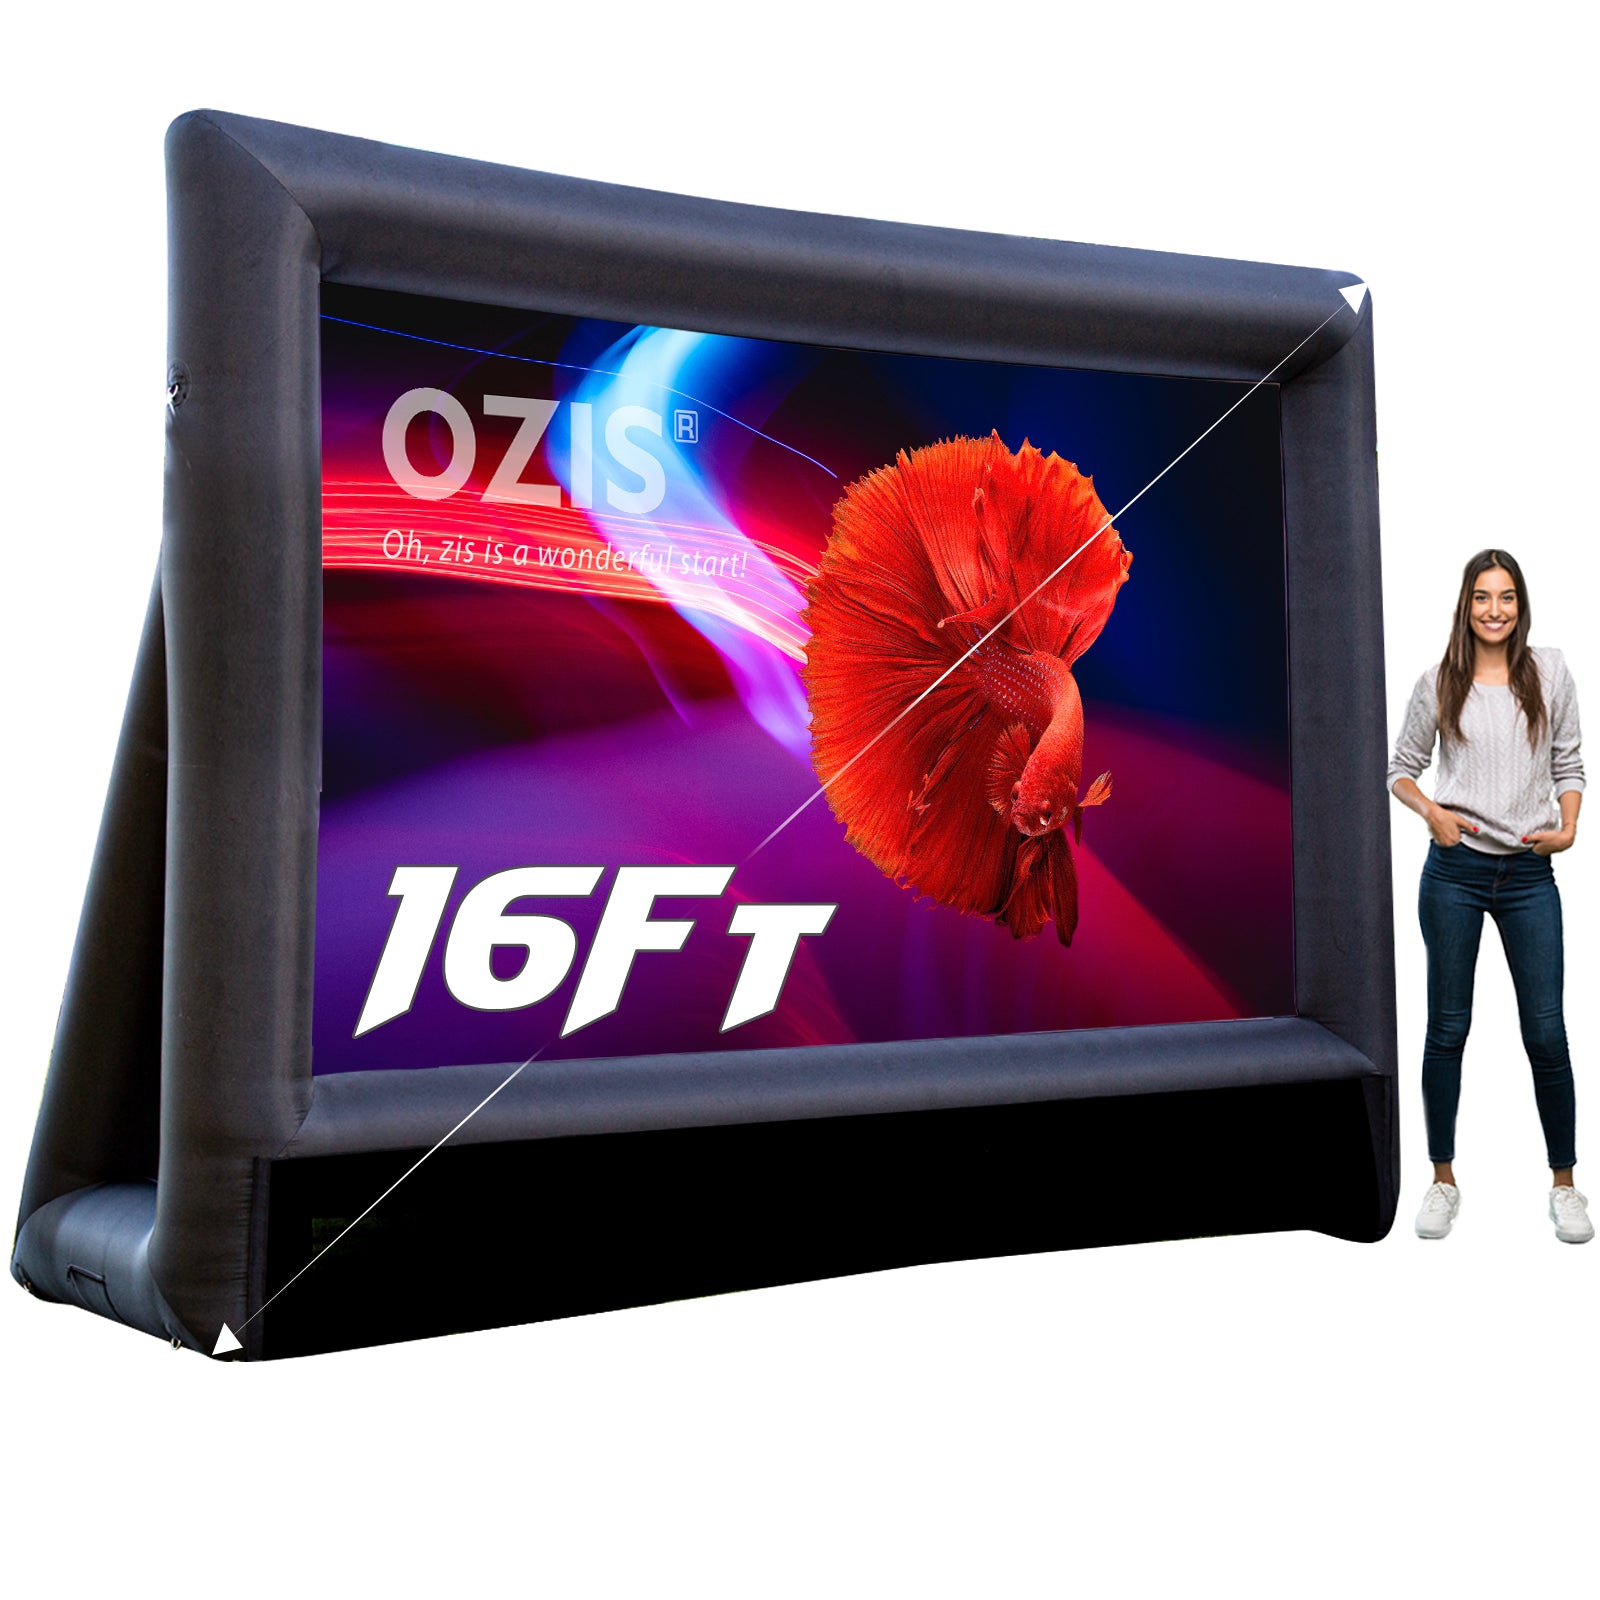 OZIS 16Ft Inflatable Outdoor and Indoor Movie Projector Screen - Blow up Mega Cinema Theater Projector Screen with 240W Blower - Supports Front and Rear Projection - for Backyard Party Barbecue Travel